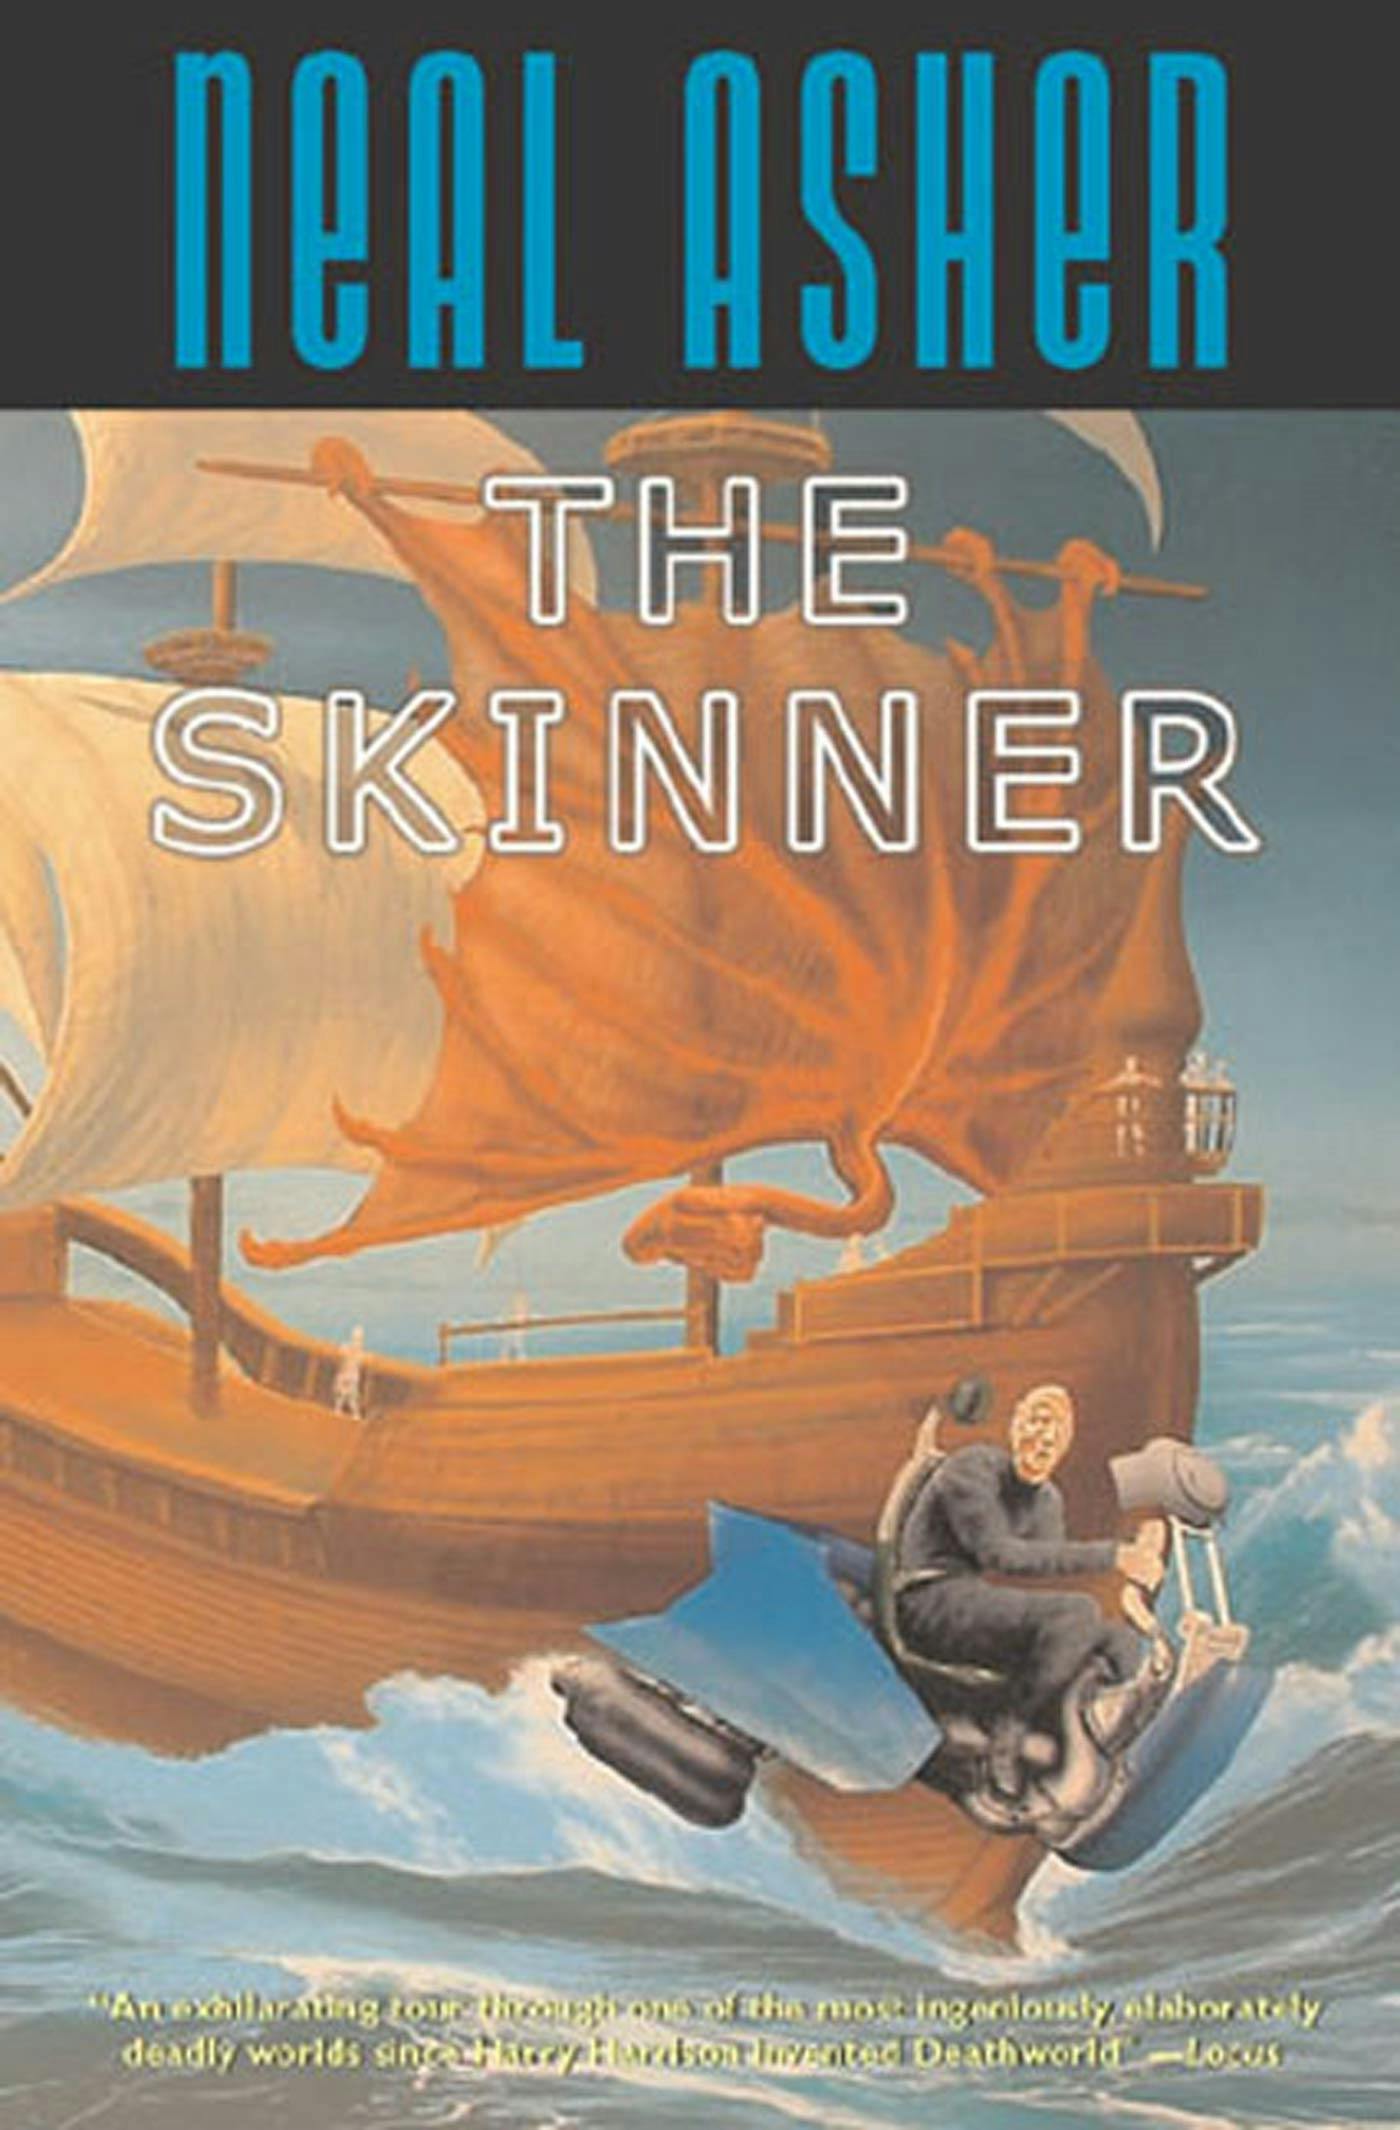 Cover for the book titled as: The Skinner